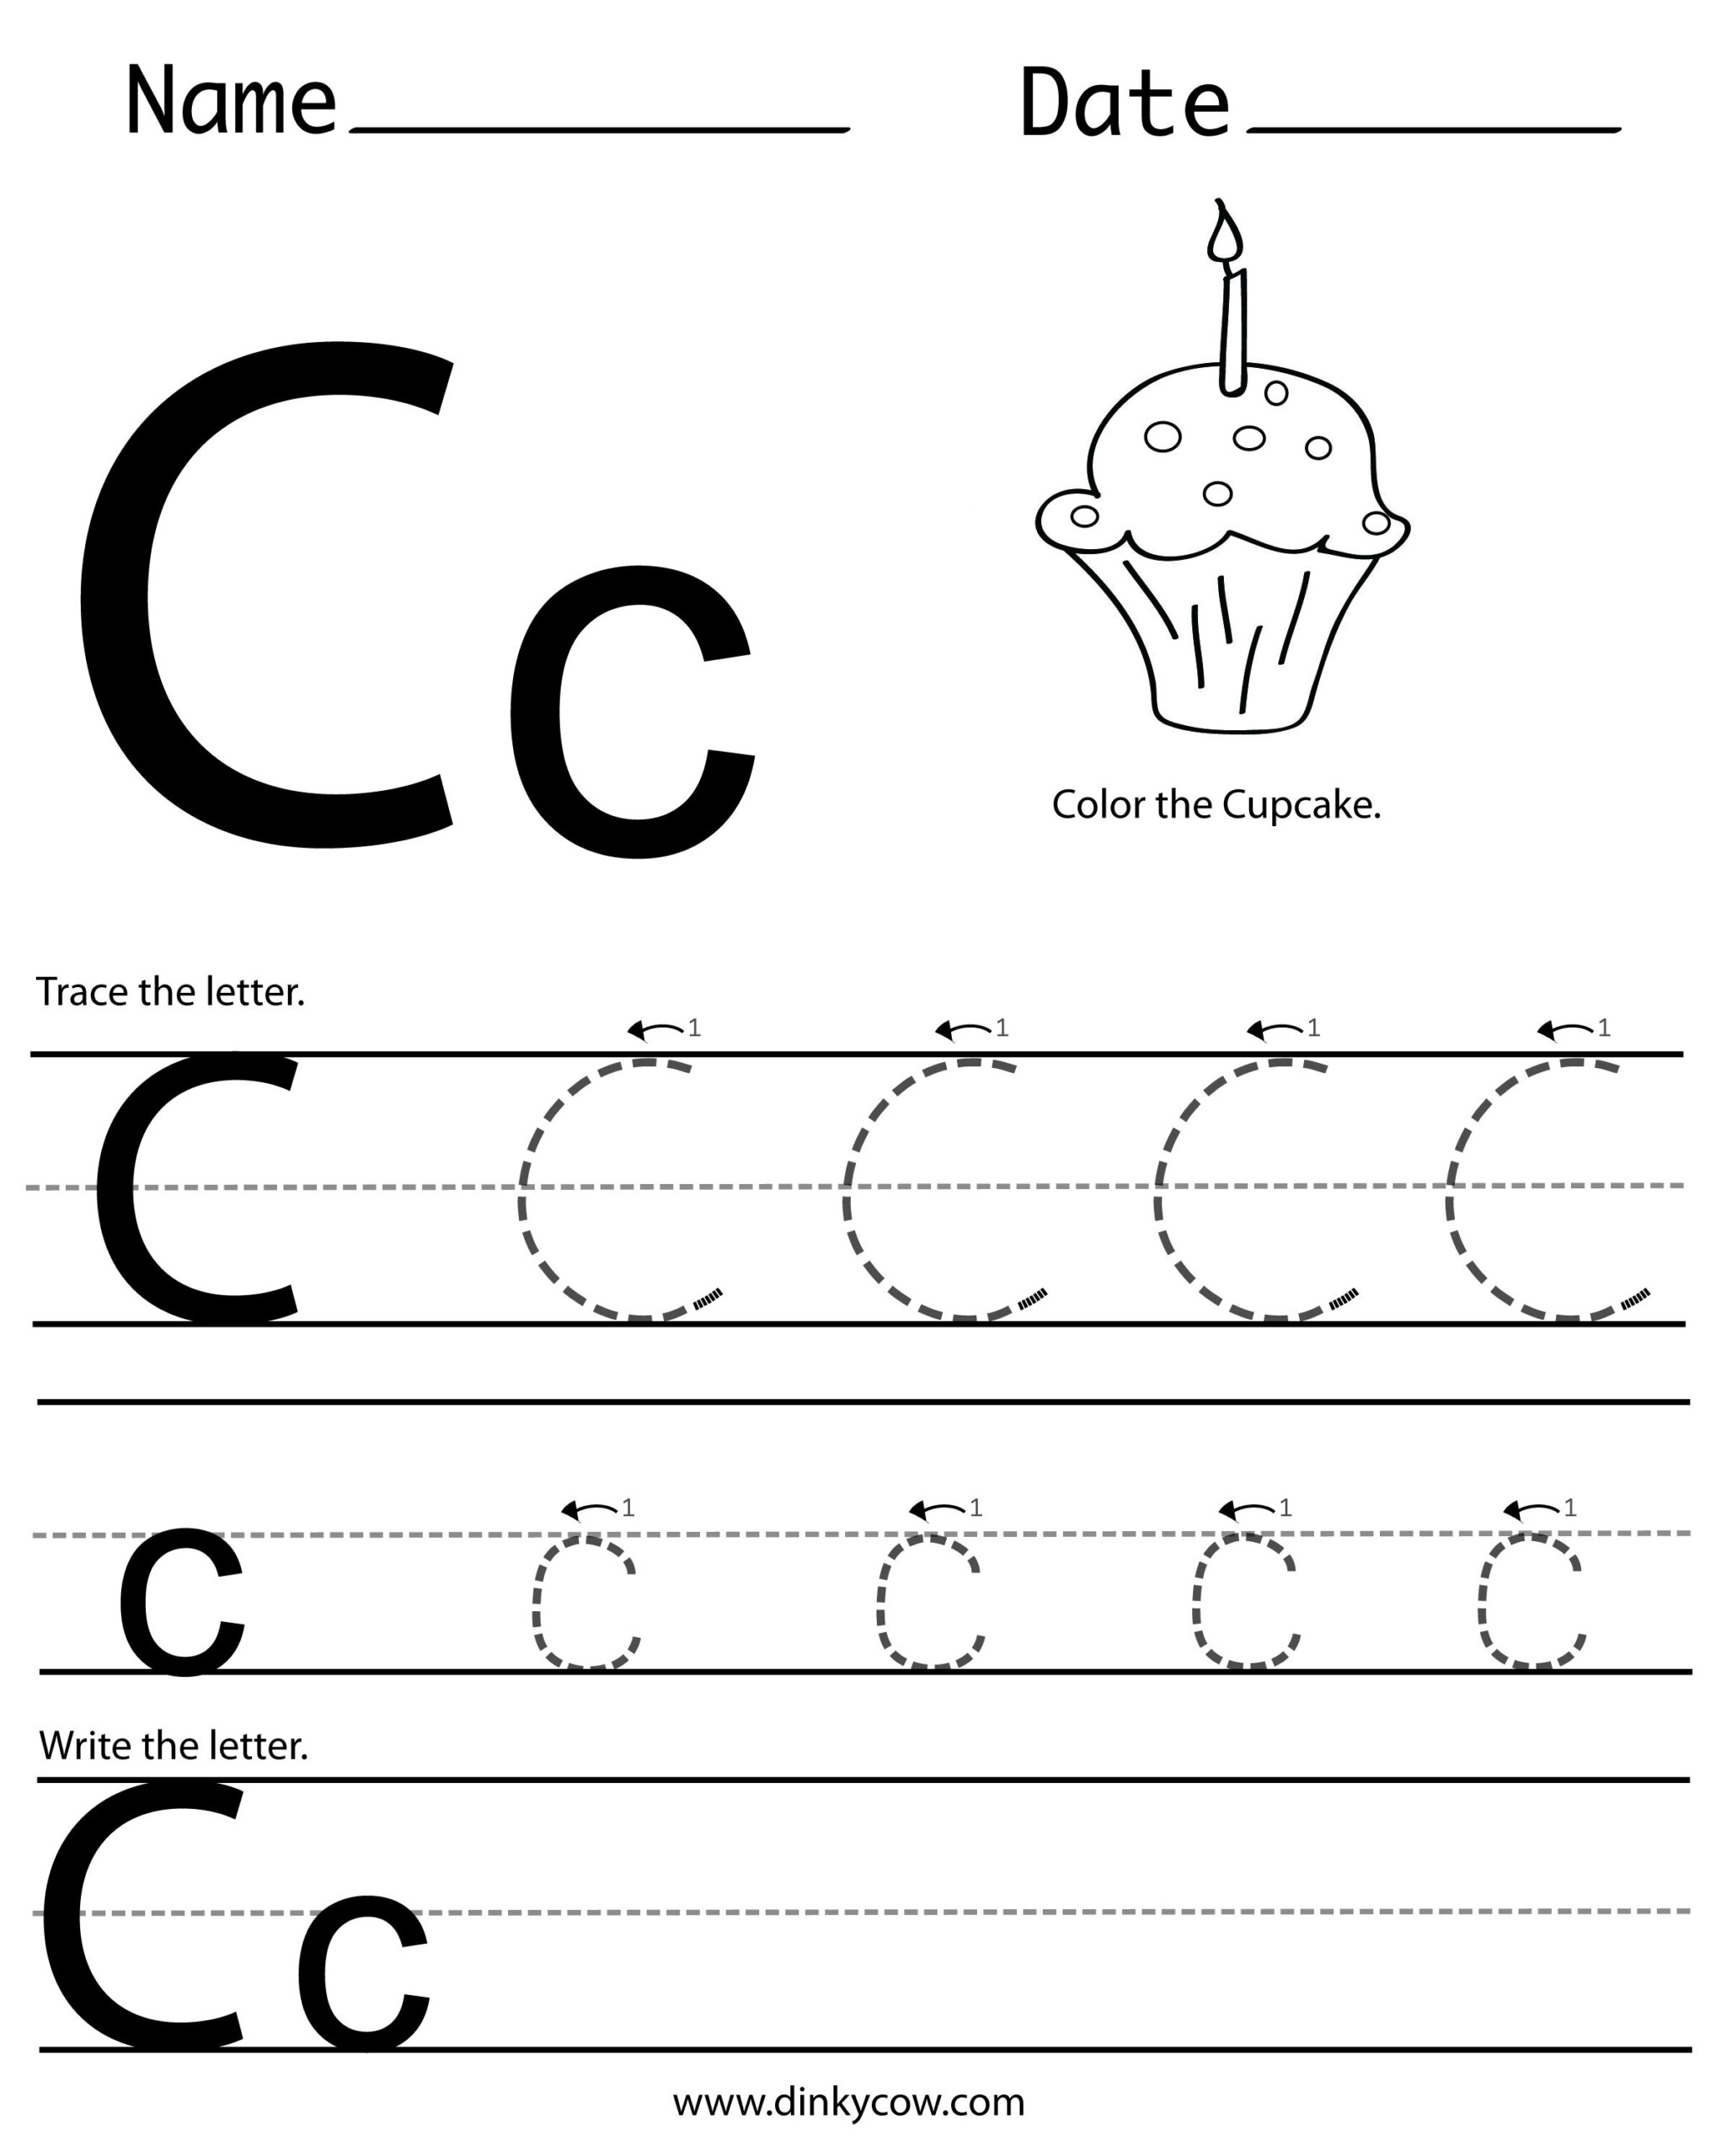 Letter C Handwriting Worksheets Worksheets For All | News To